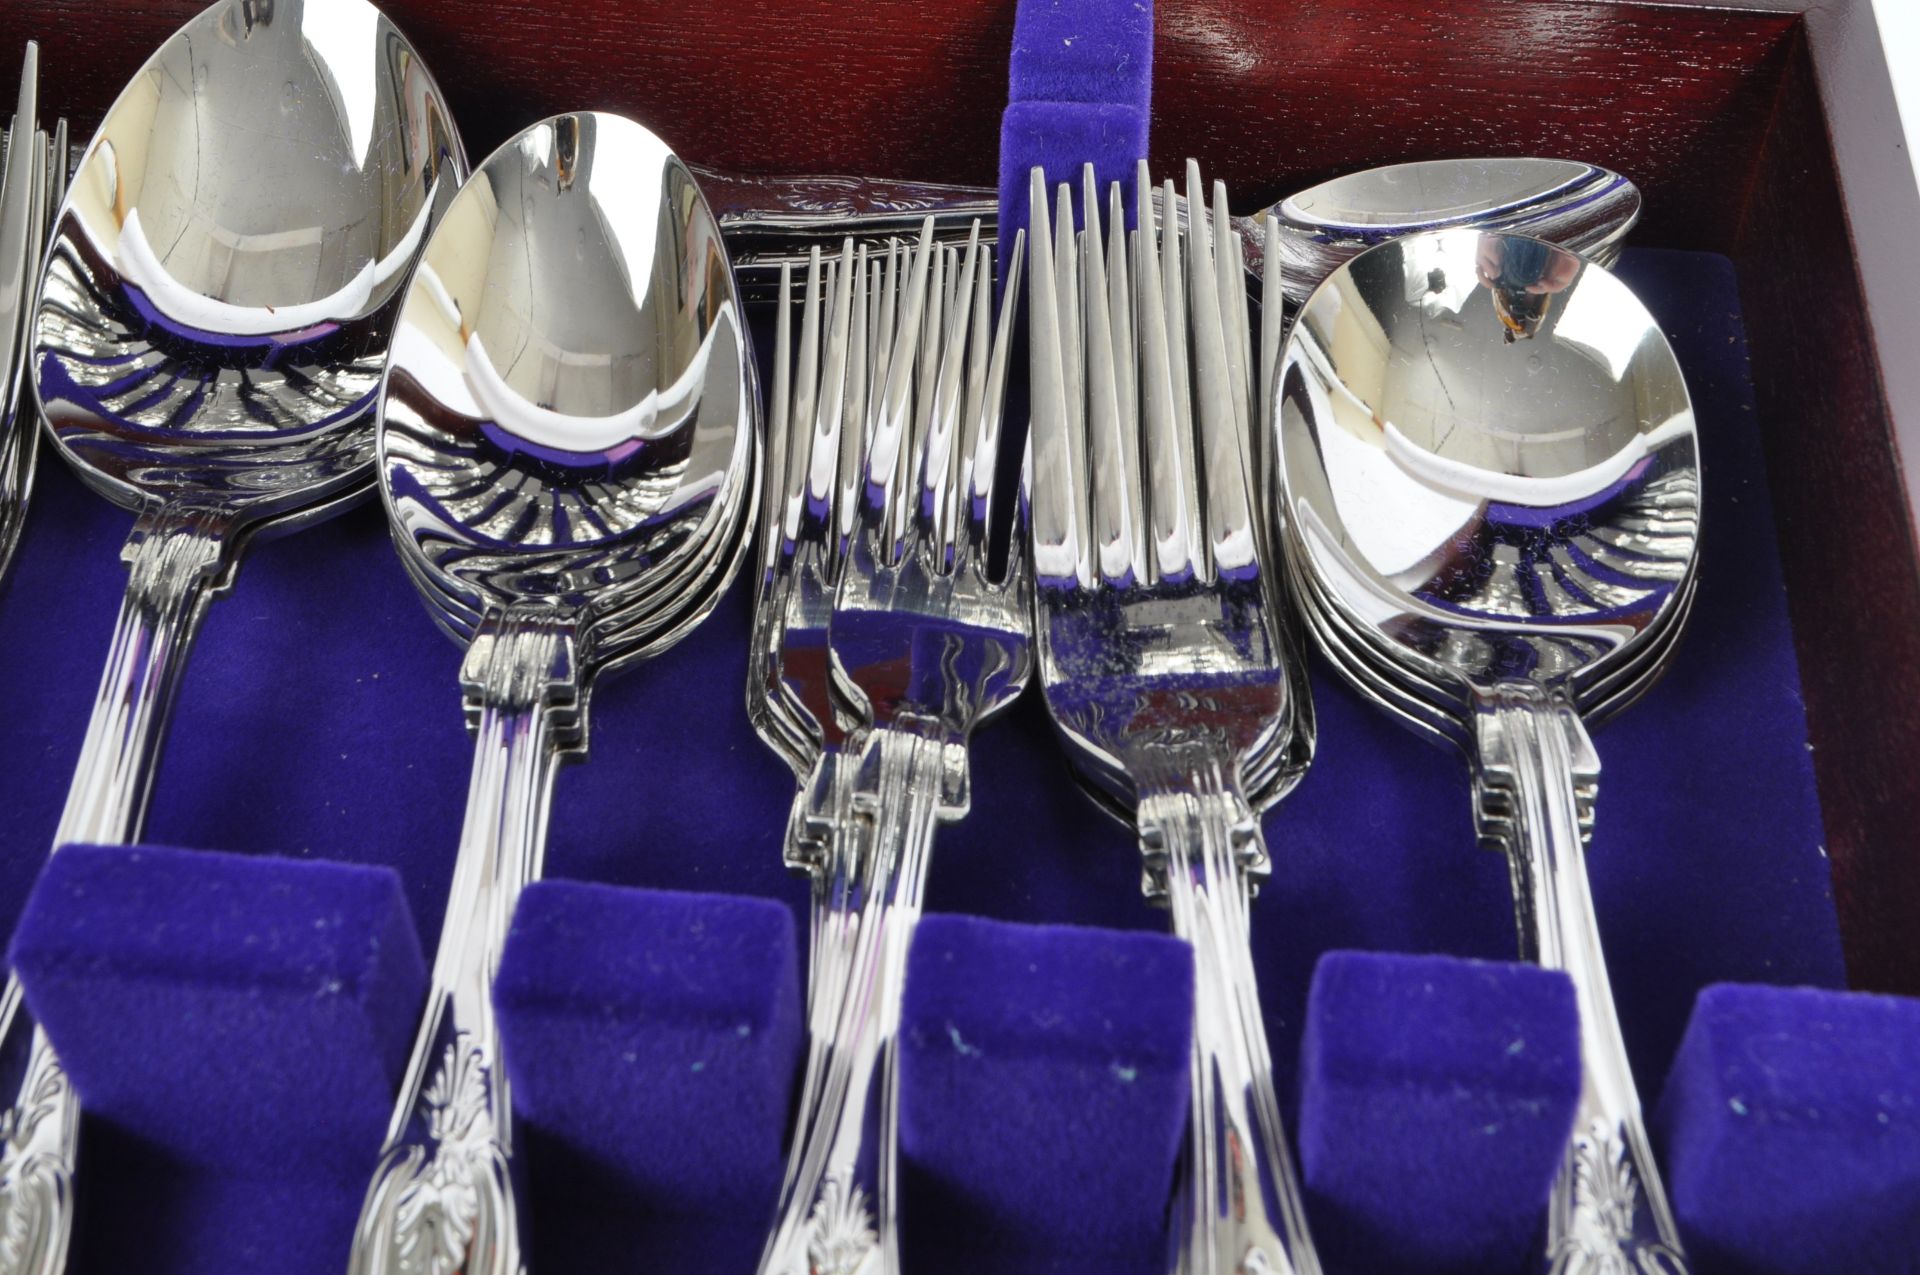 1970S STAINLESS STEEL CUTLERY SET BY ARTHUR PRICE INTERNATIONAL - Image 6 of 11